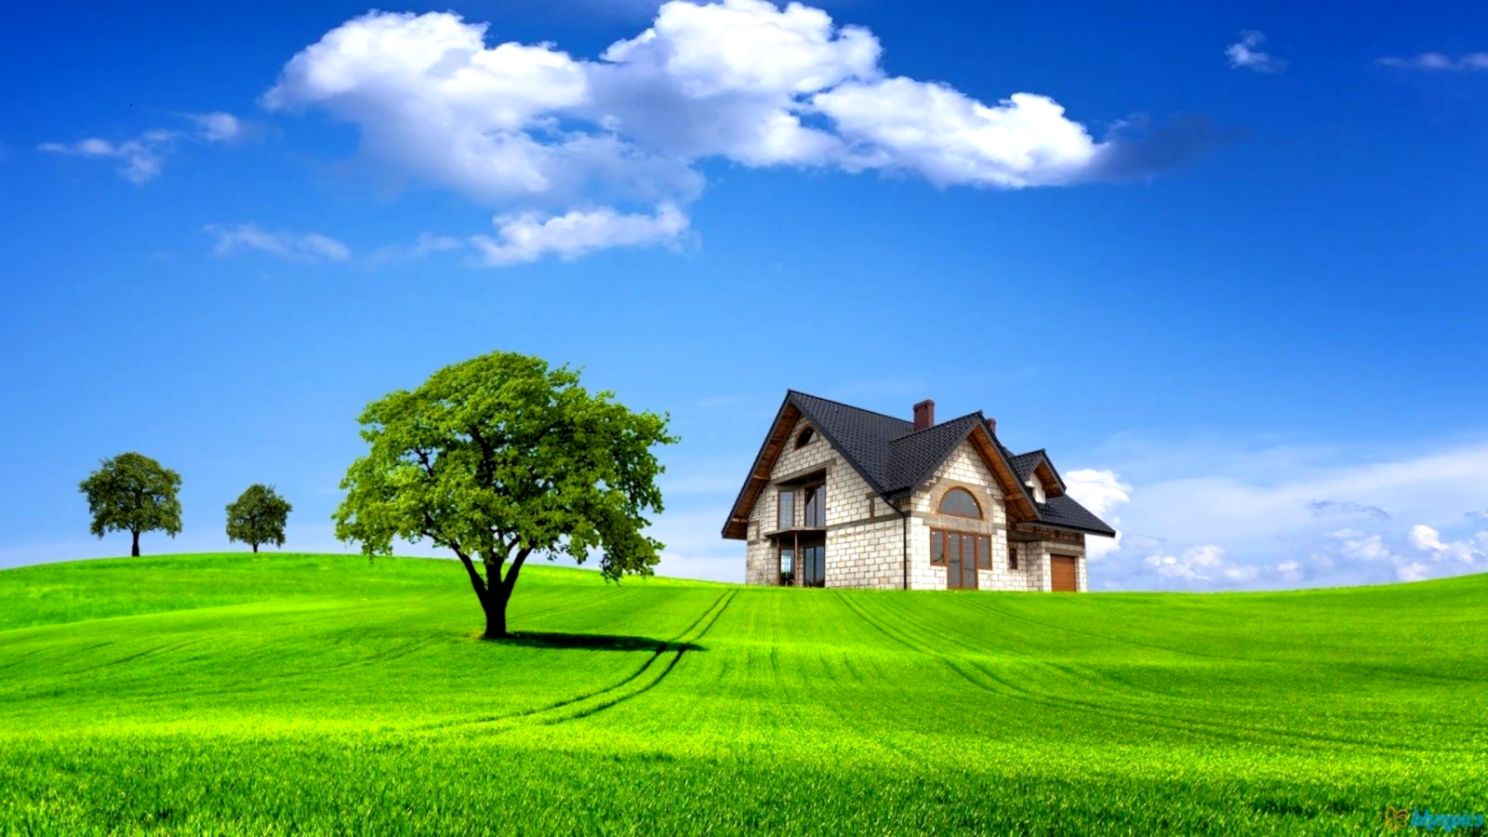 Nature Inspired House Background Wallpaper | Wallpapers Quality